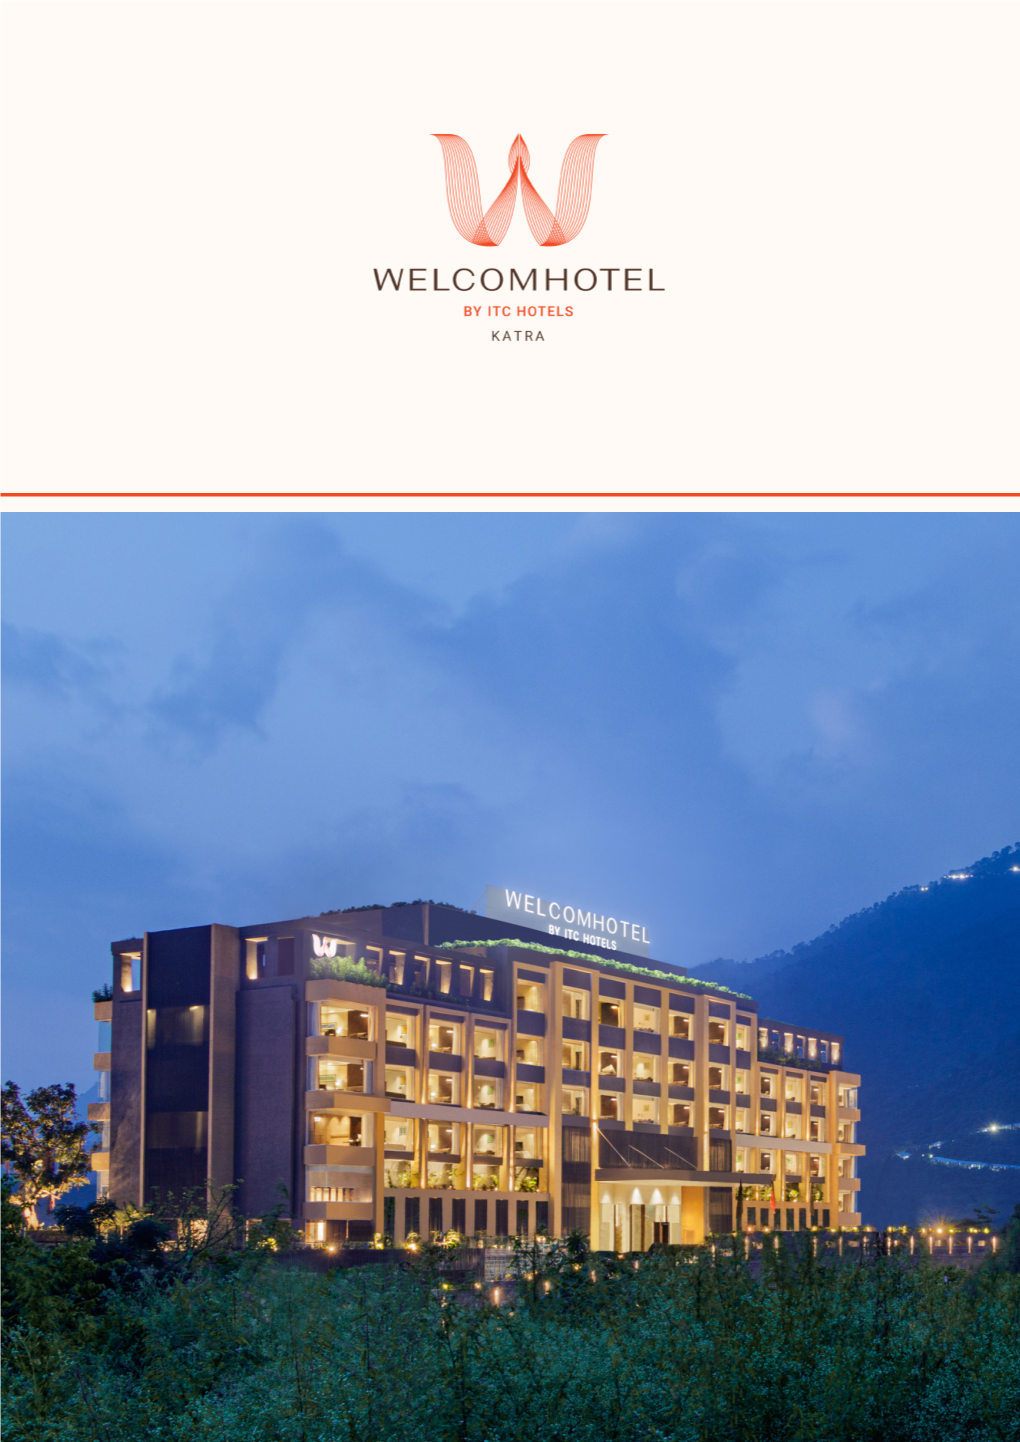 Welcomhotel Katra Overview